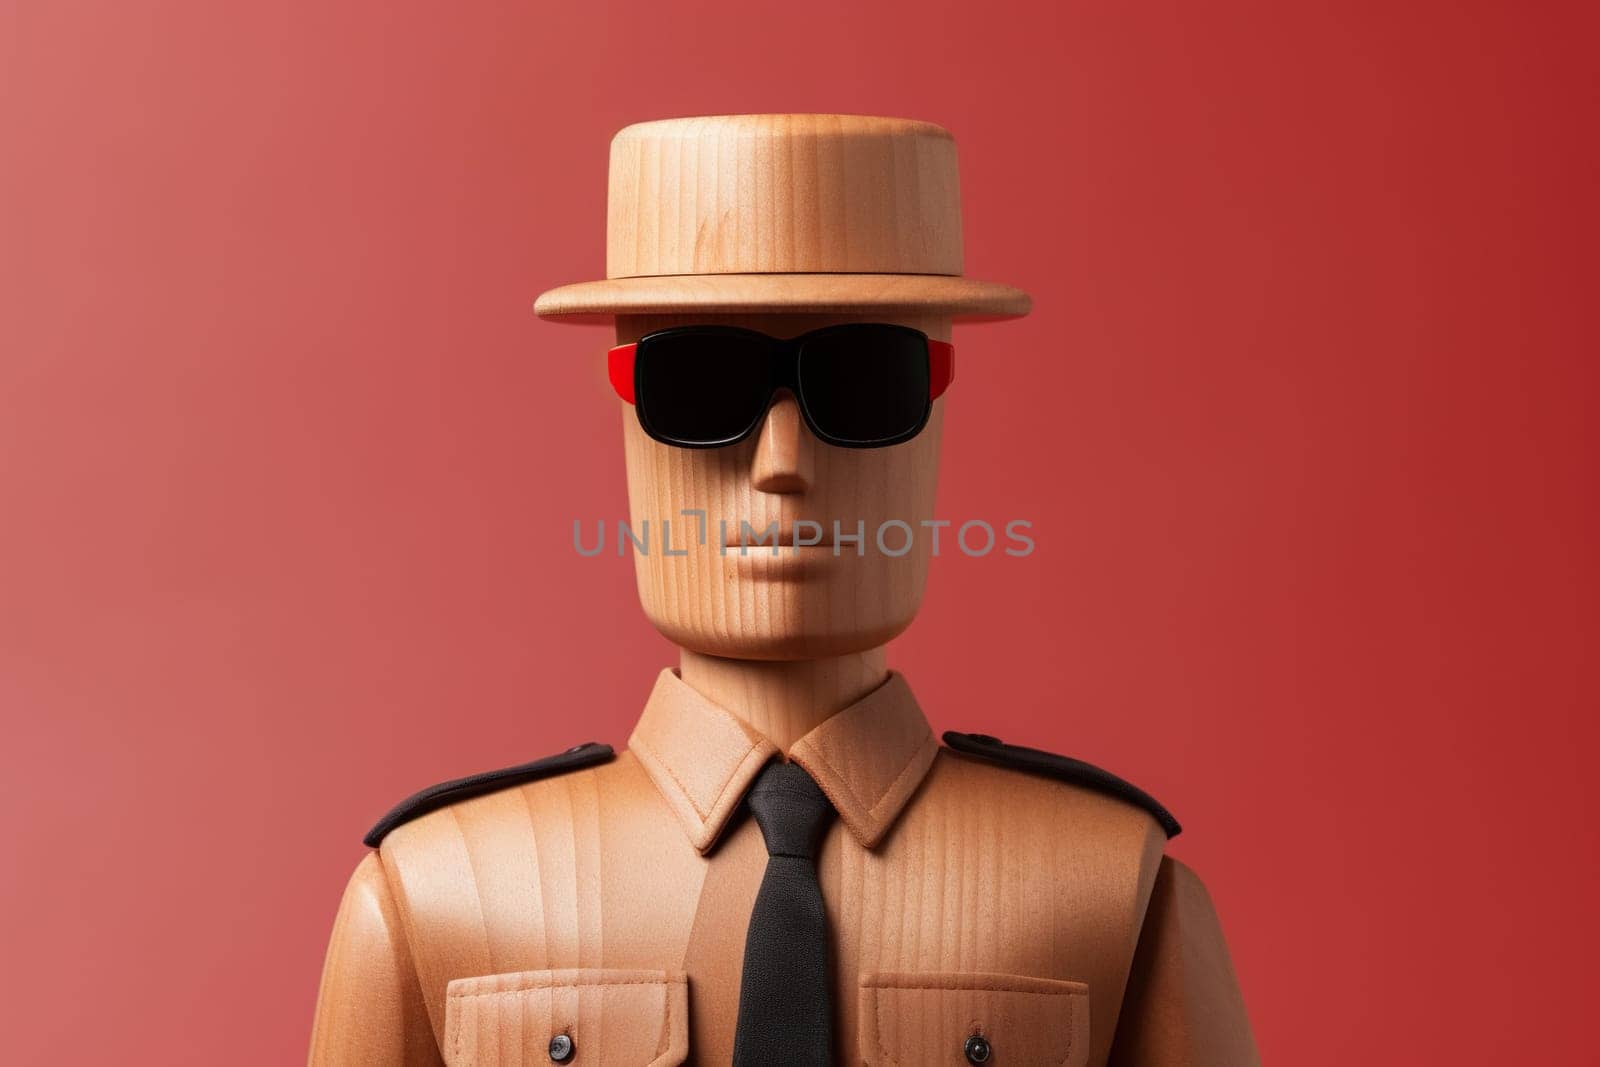 Sheriff. Wooden man in a sheriff's suit and hat.